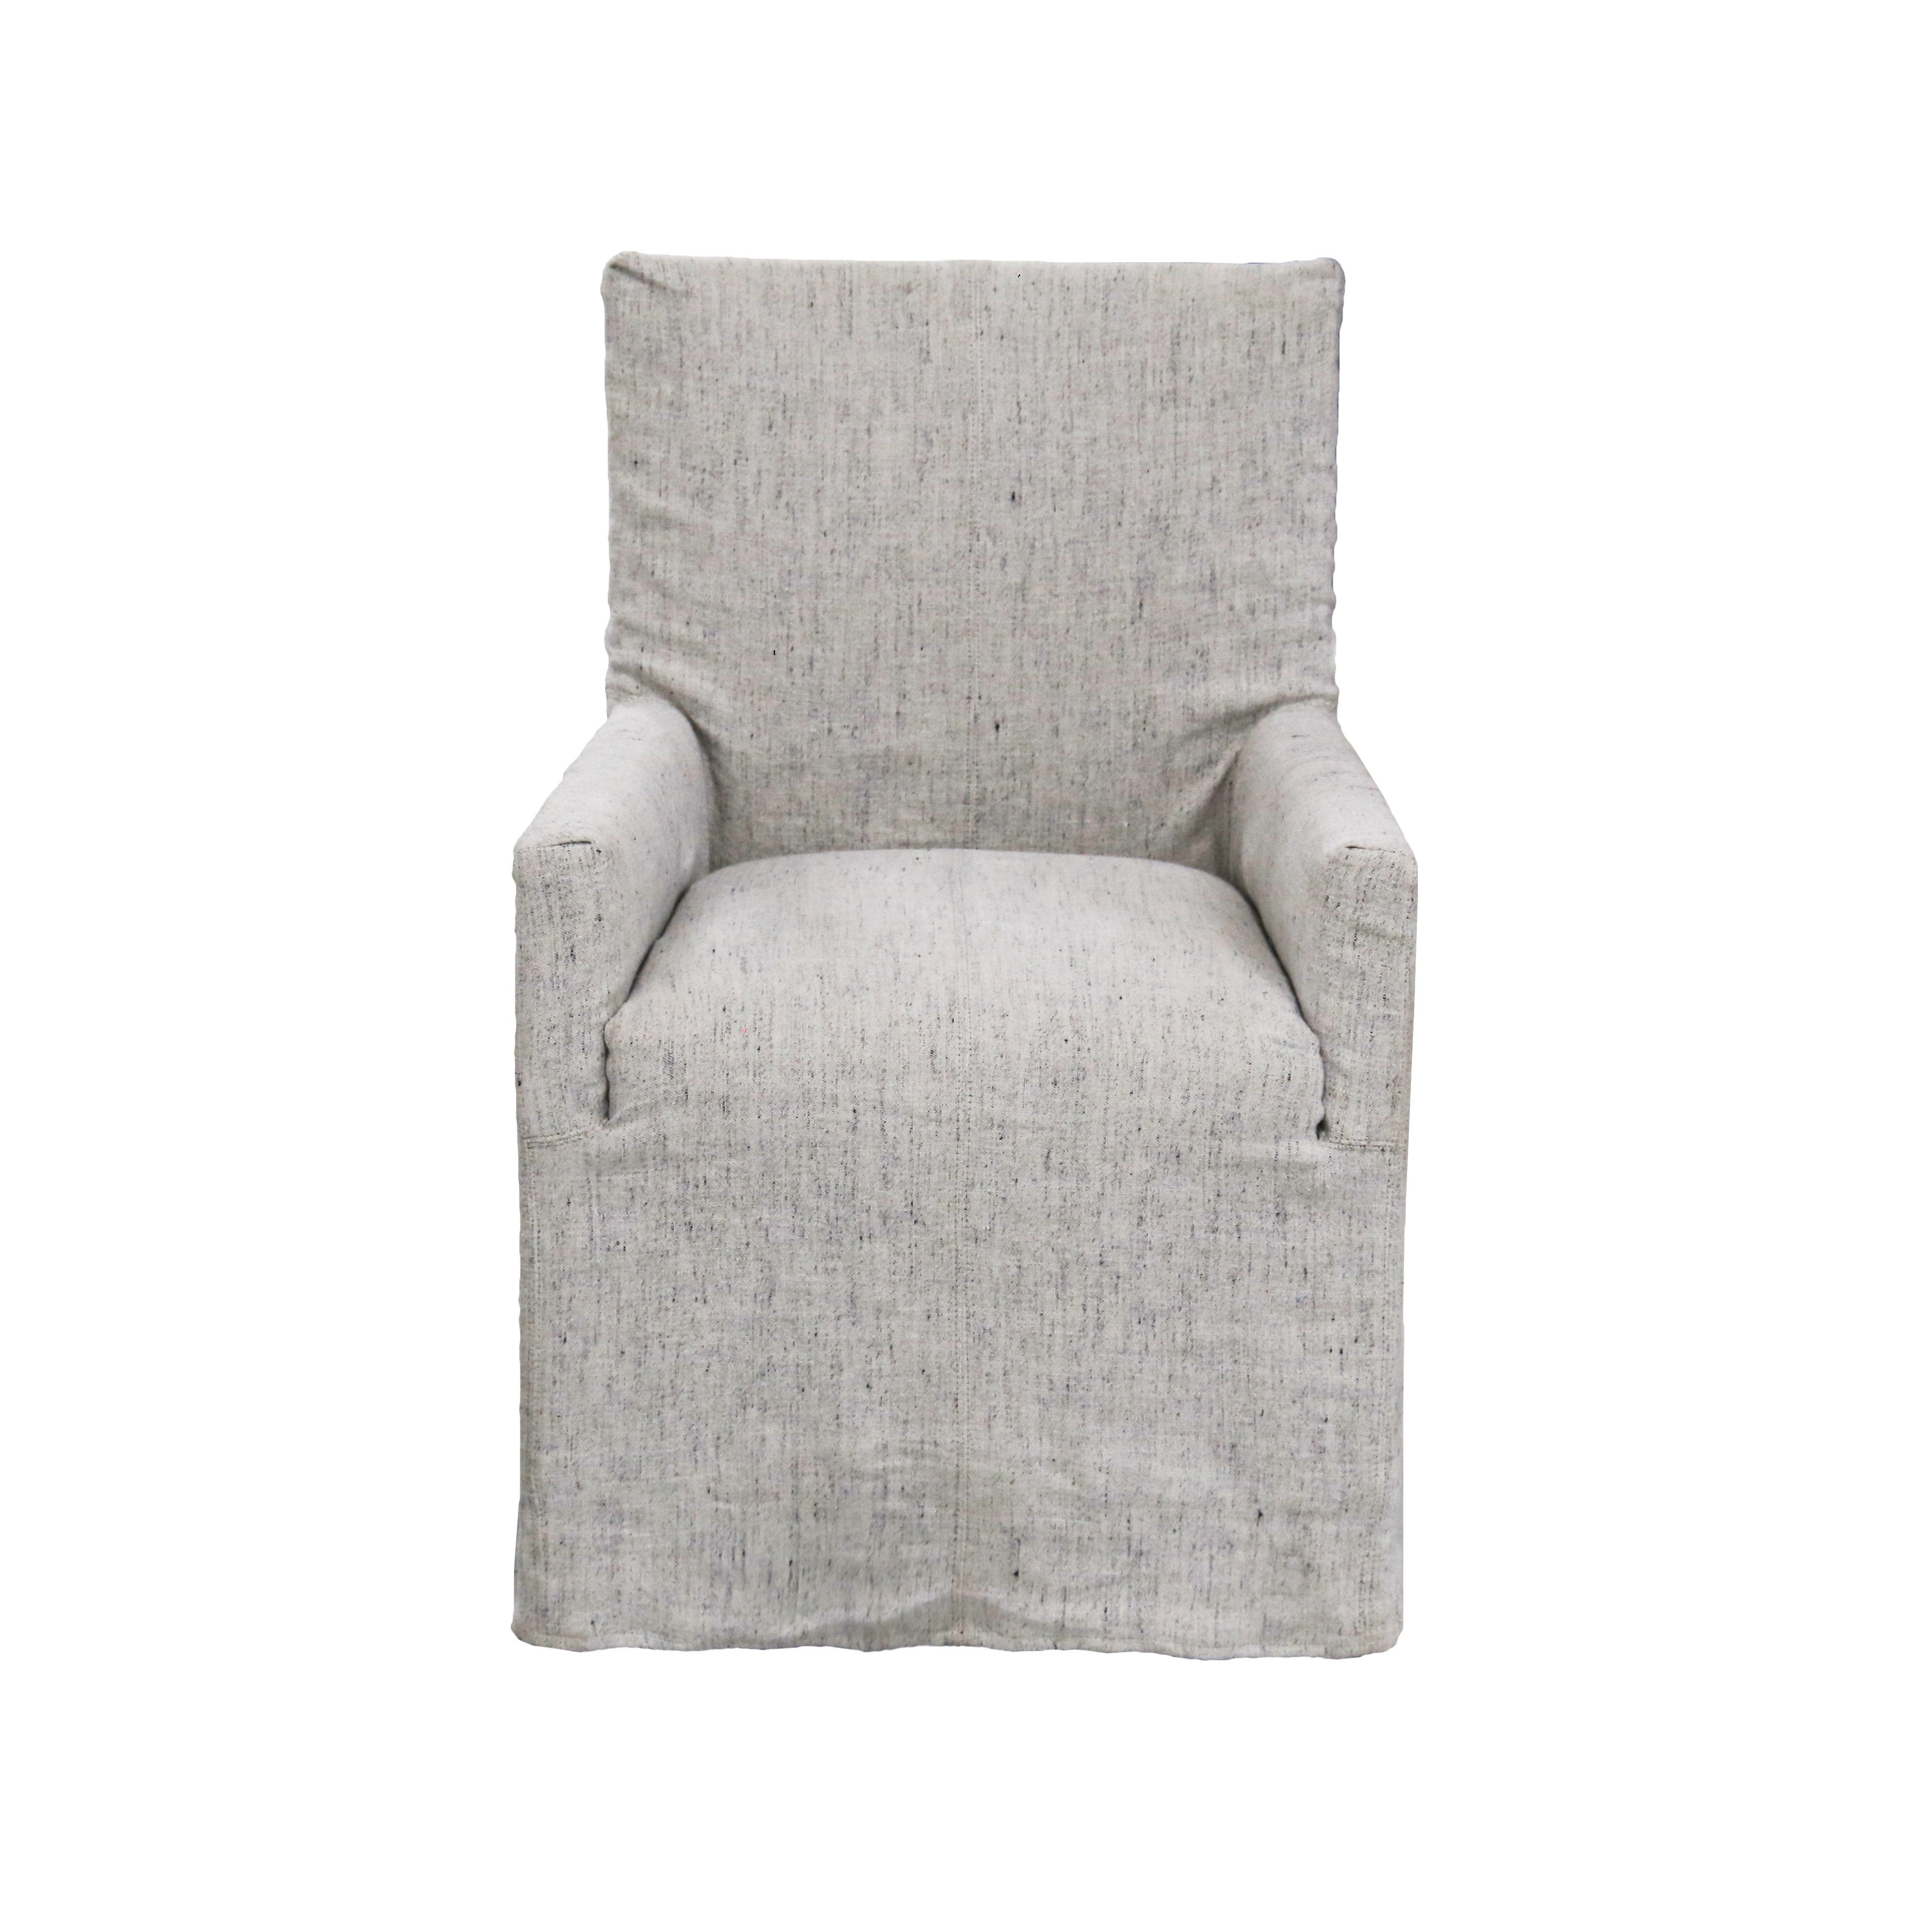 The Alois Dining Chairs by Verellen are a calm, comfy choice for your dining room. Photographed in a beautiful Stonewash slipcover.   Size: 38"h x 25.5" w x 29"d